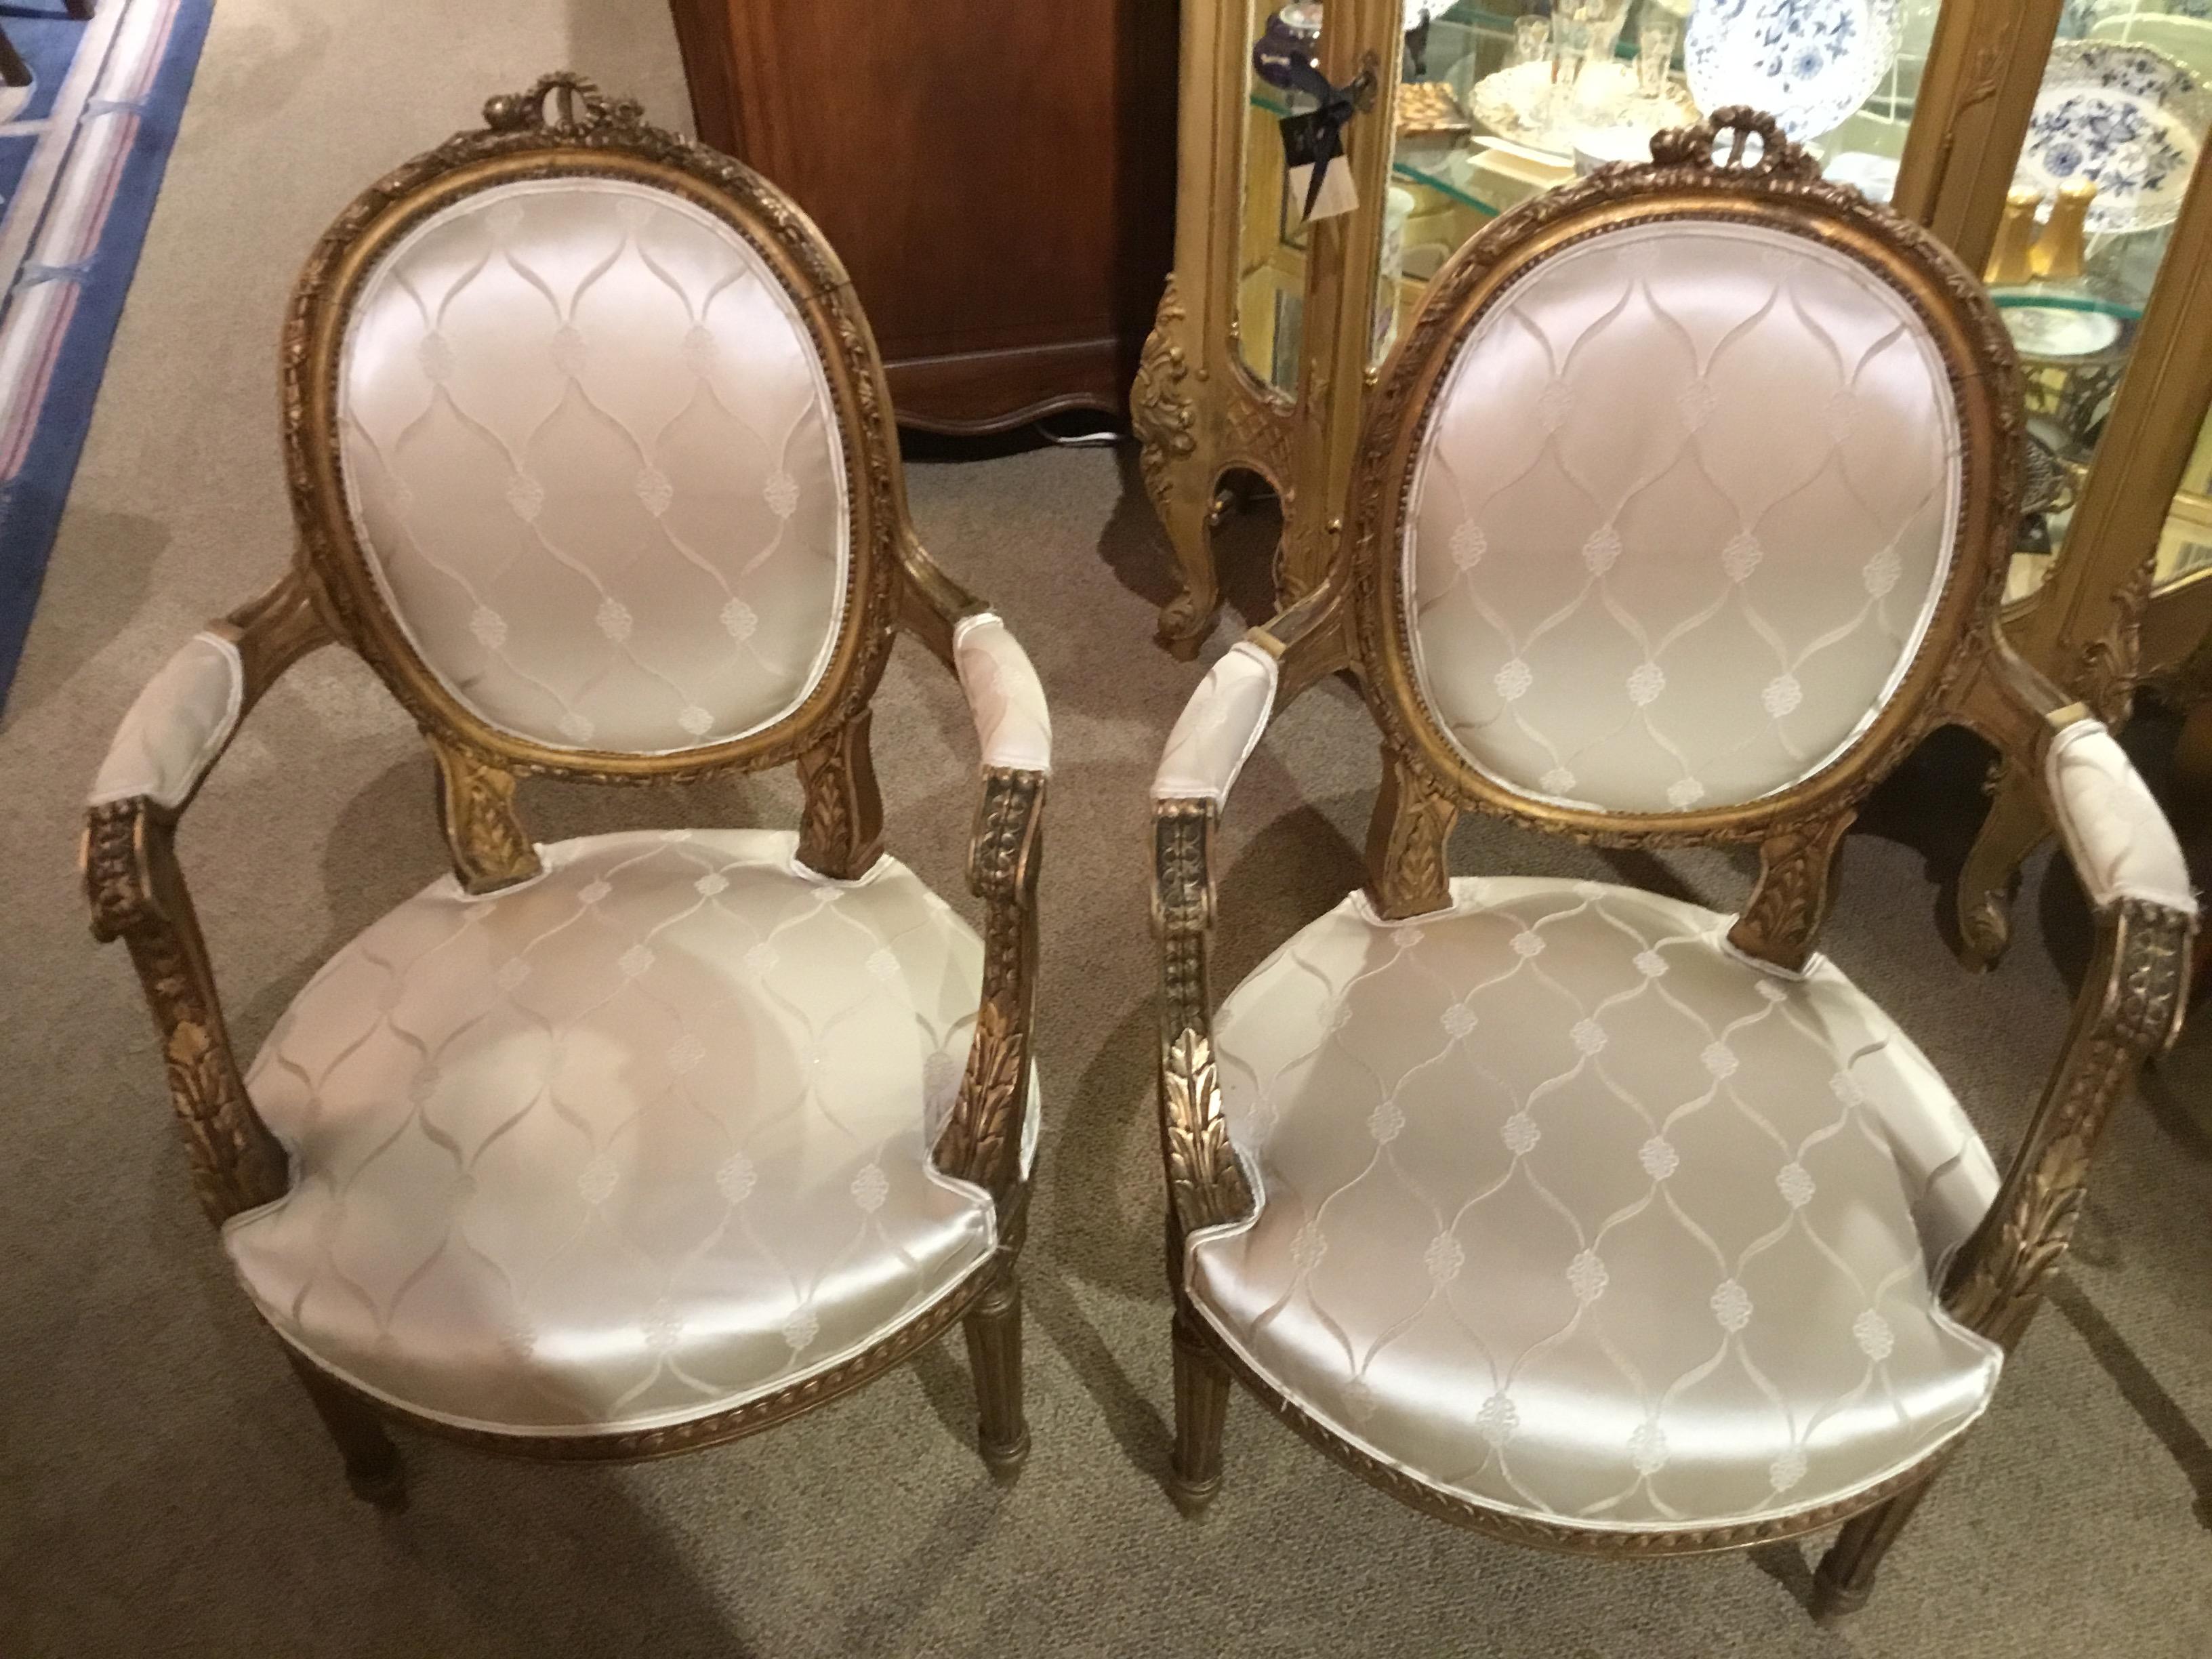 Pair of Louis XVI style 19th century giltwood armchairs with new white silk
Upholstery. Having a reed leg. Oval back with a lovely carved crest at the
Top center.